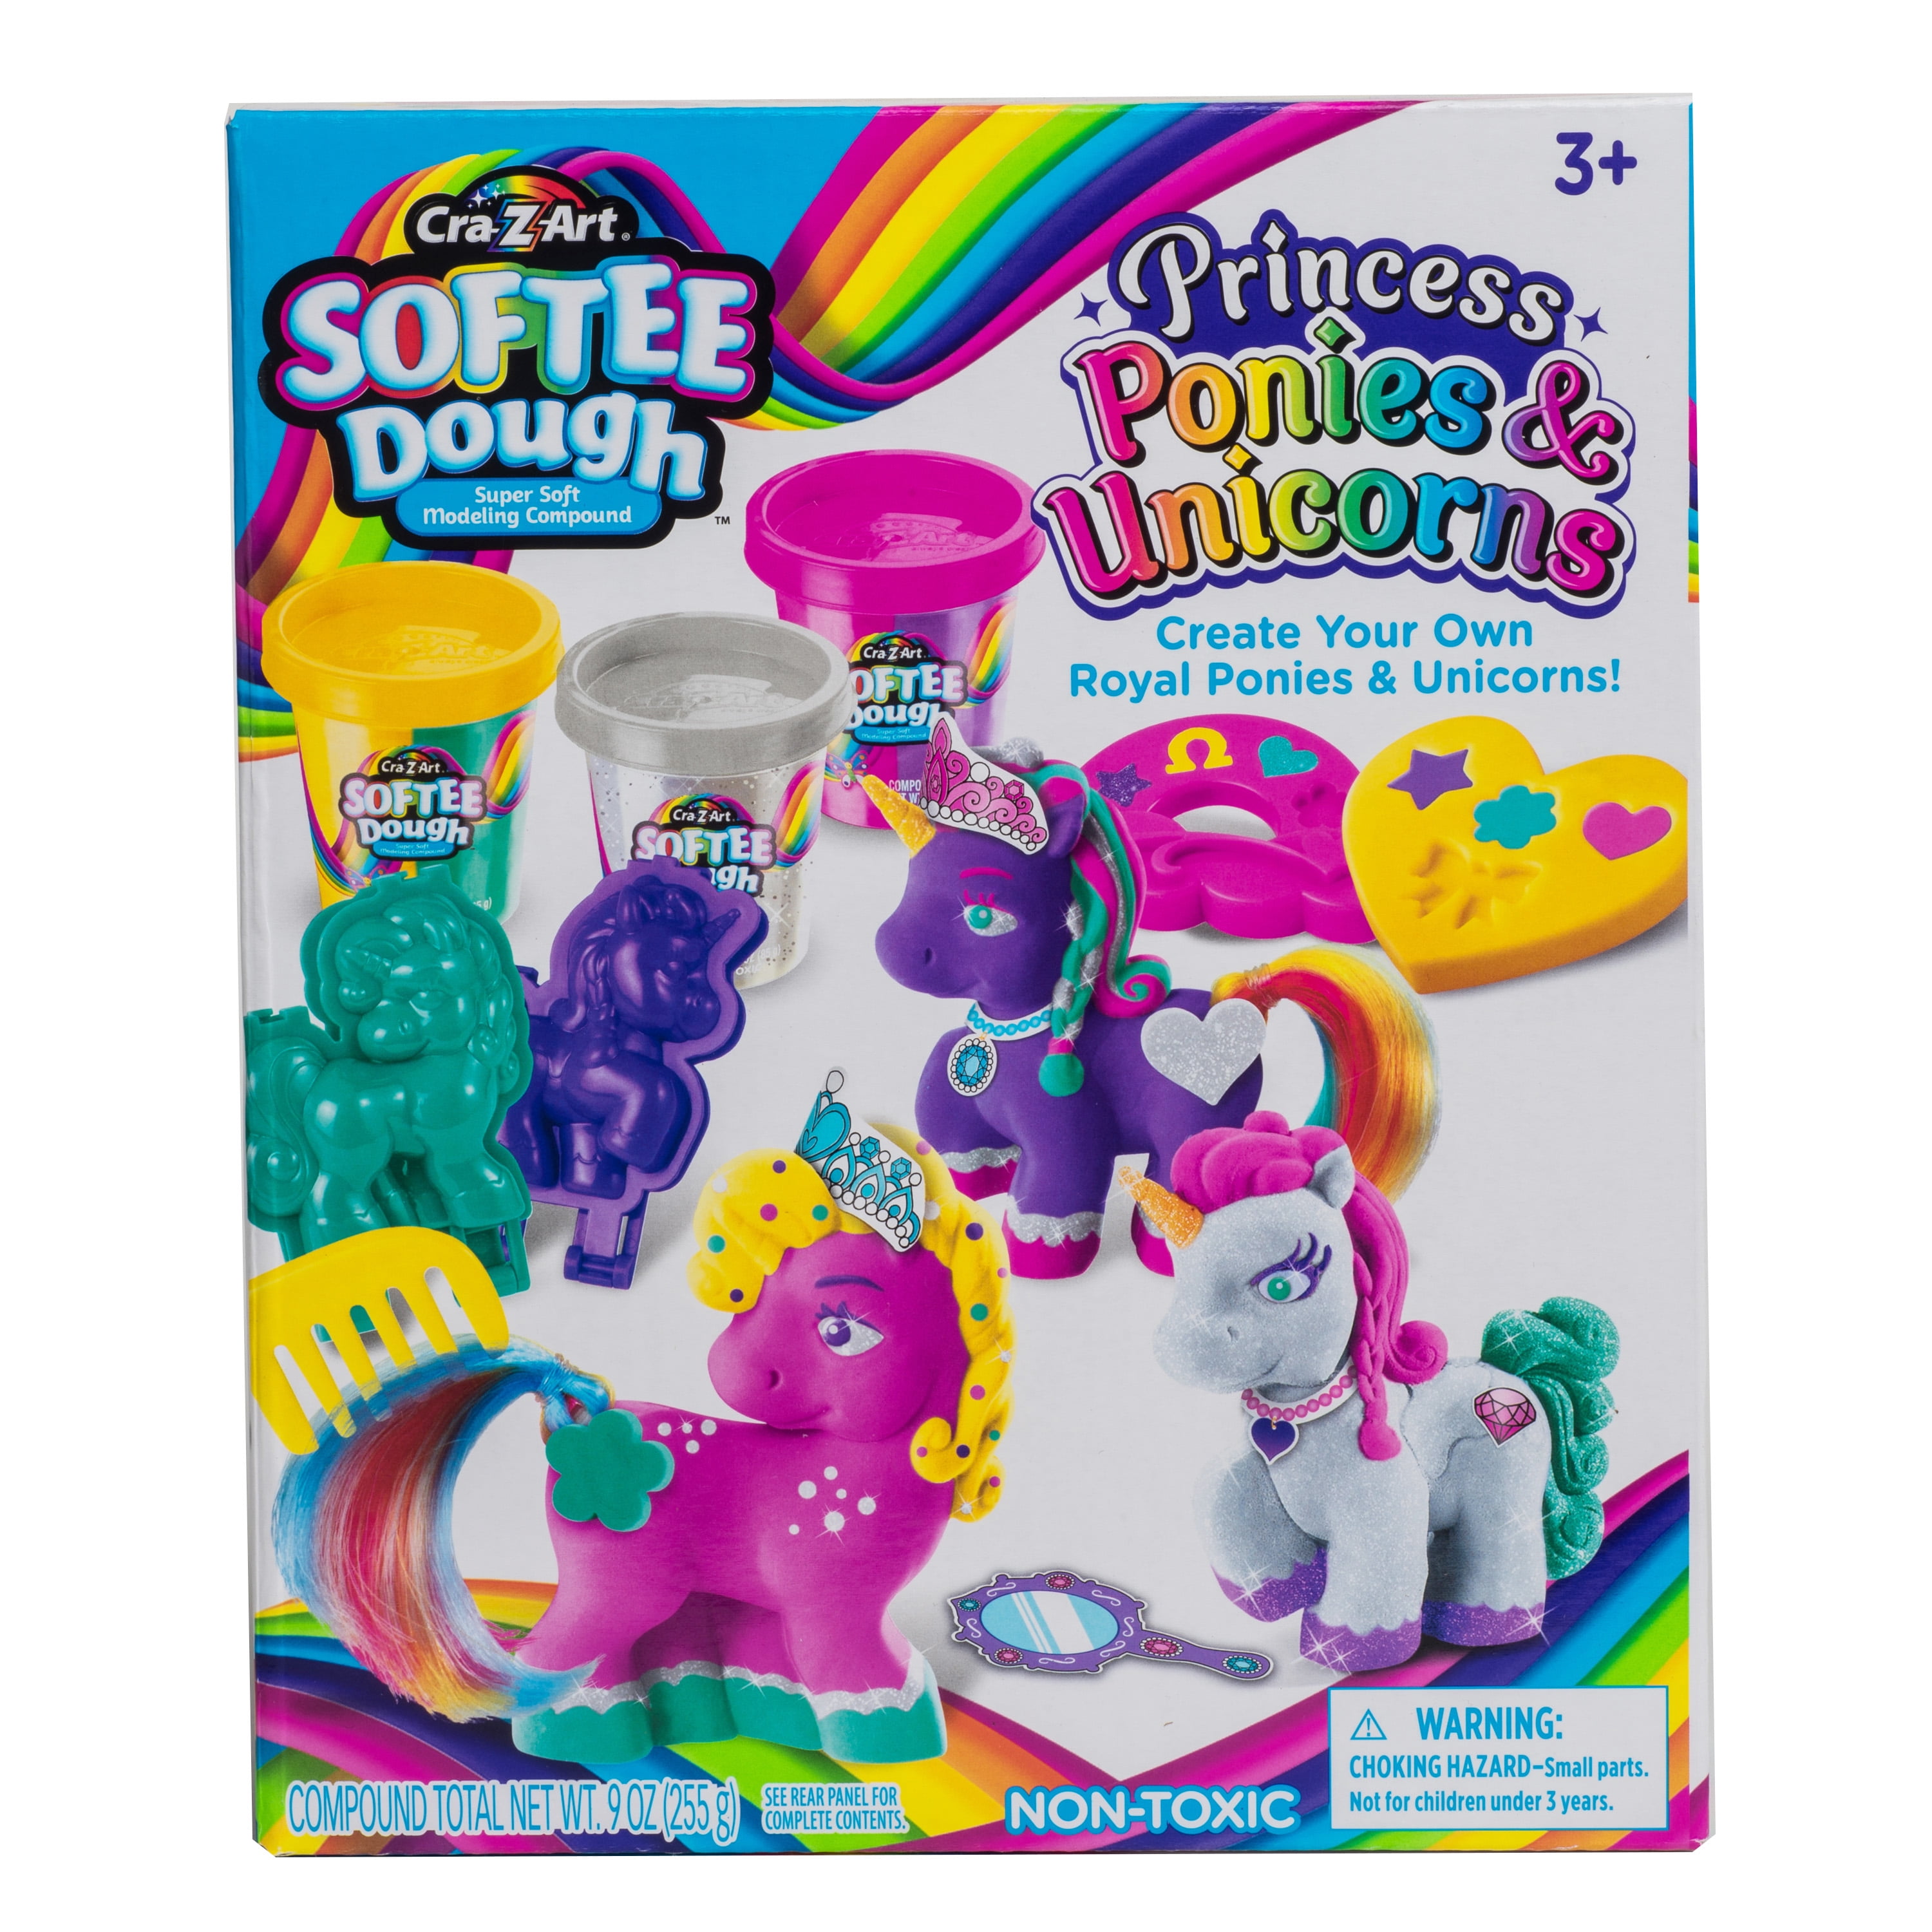 Cra-Z-Art Softee Dough Multicolor Princess Ponies & Unicorn, Easter Gift for Kids